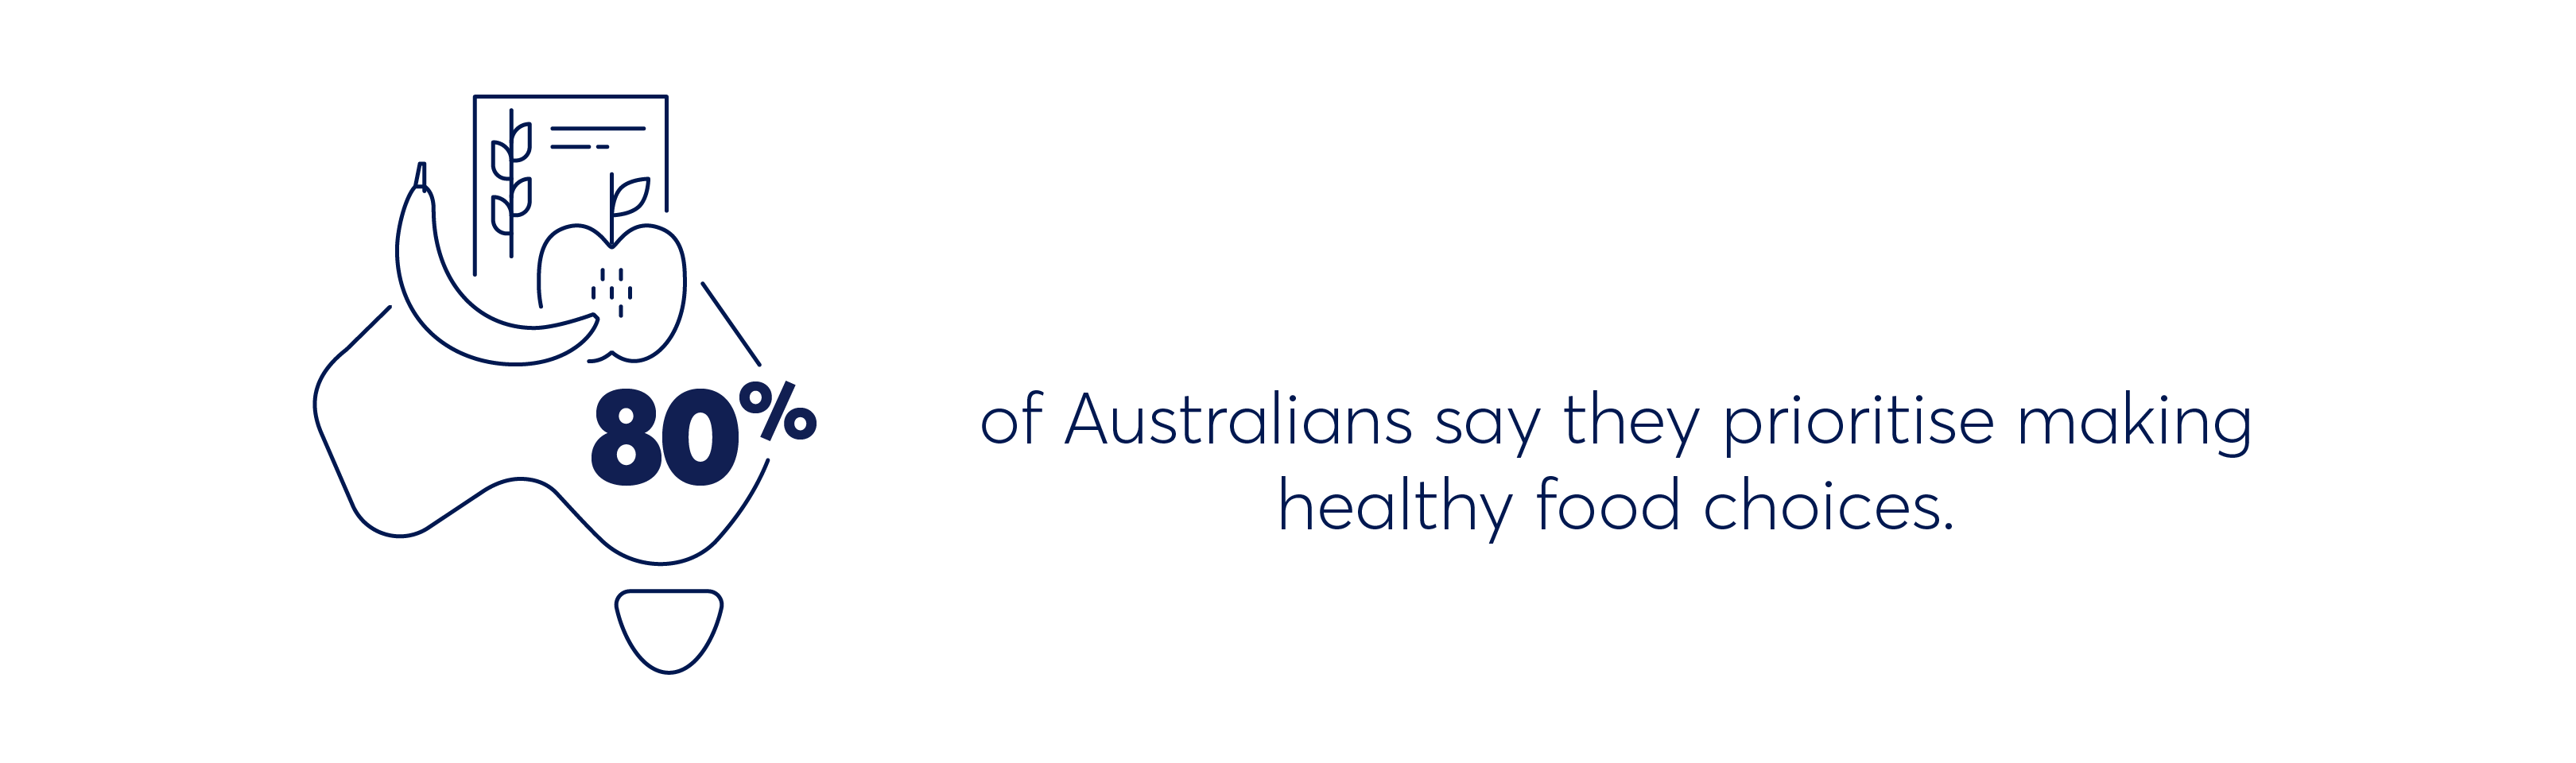 Do Australians prioritise healthy eating? - Food trends by generation - vis 1